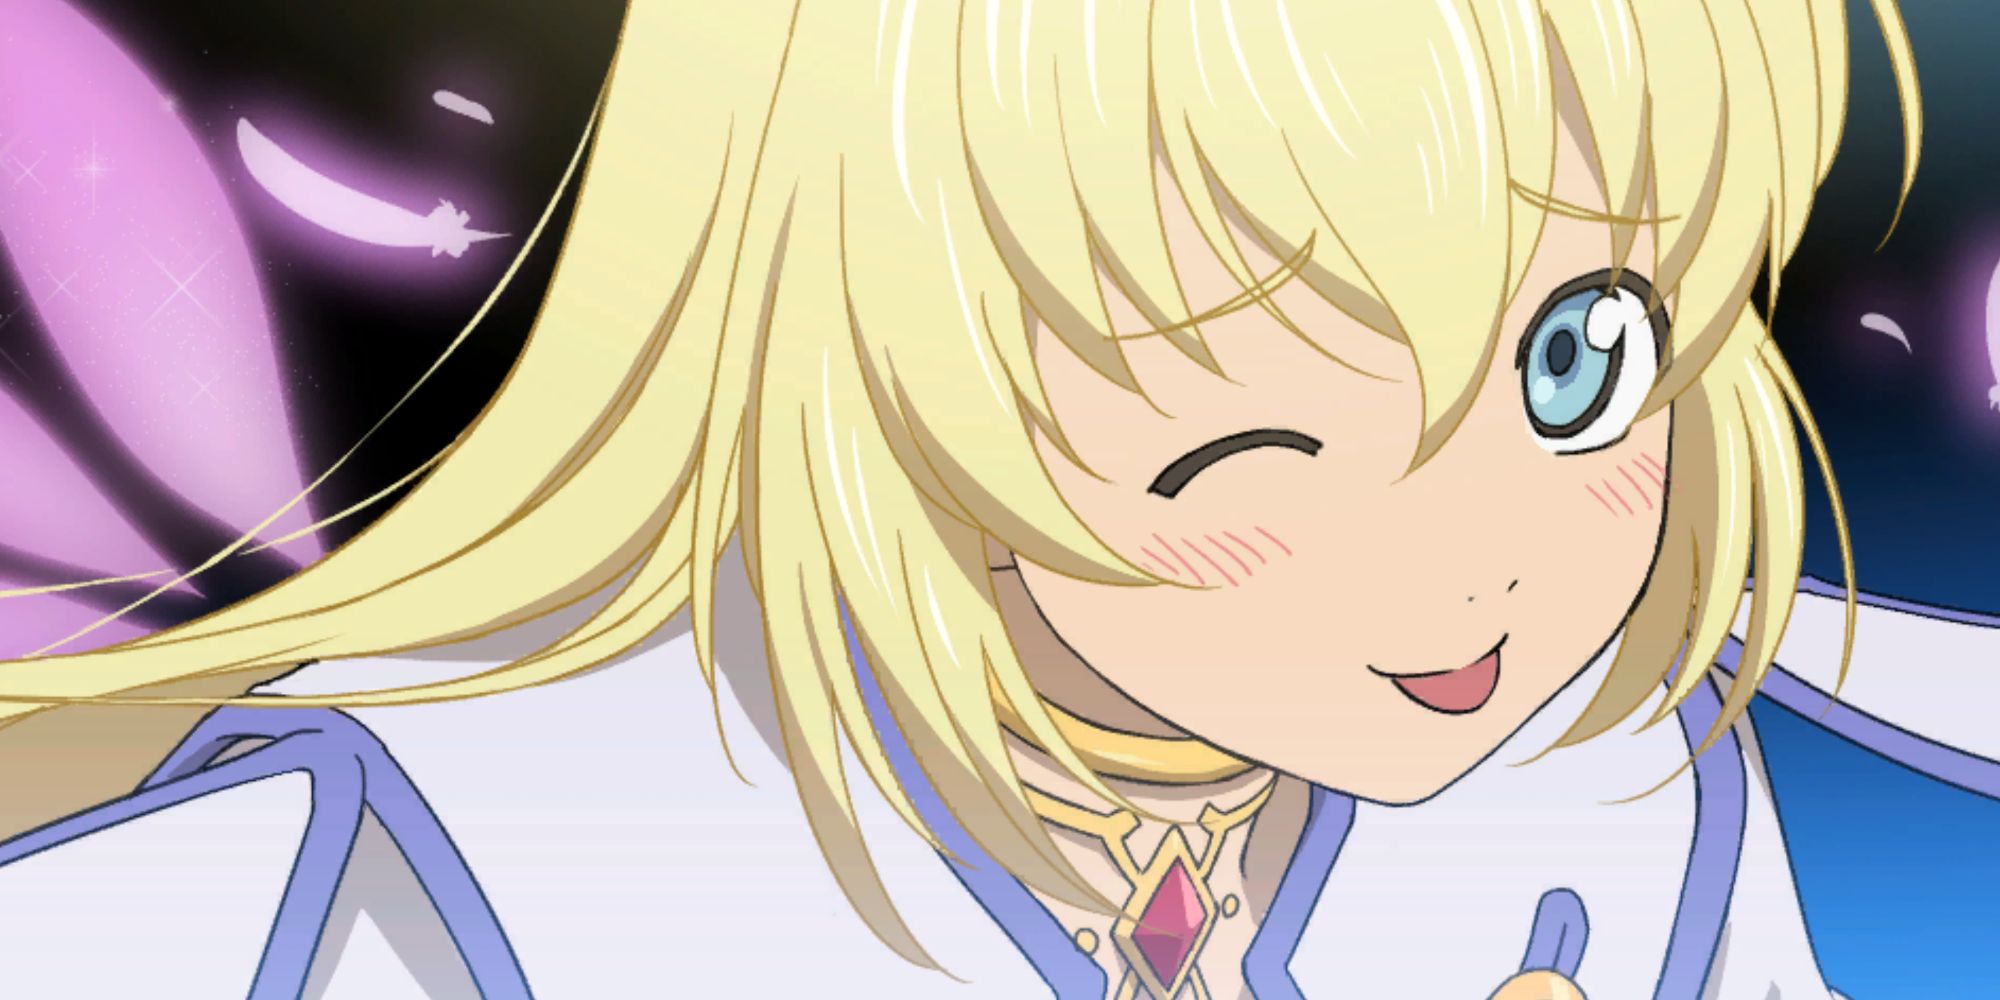 An image of Colette's Mystic Arte cut-in from Tales of Symphonia Remastered, where she poses by sticking her tongue out and winking.